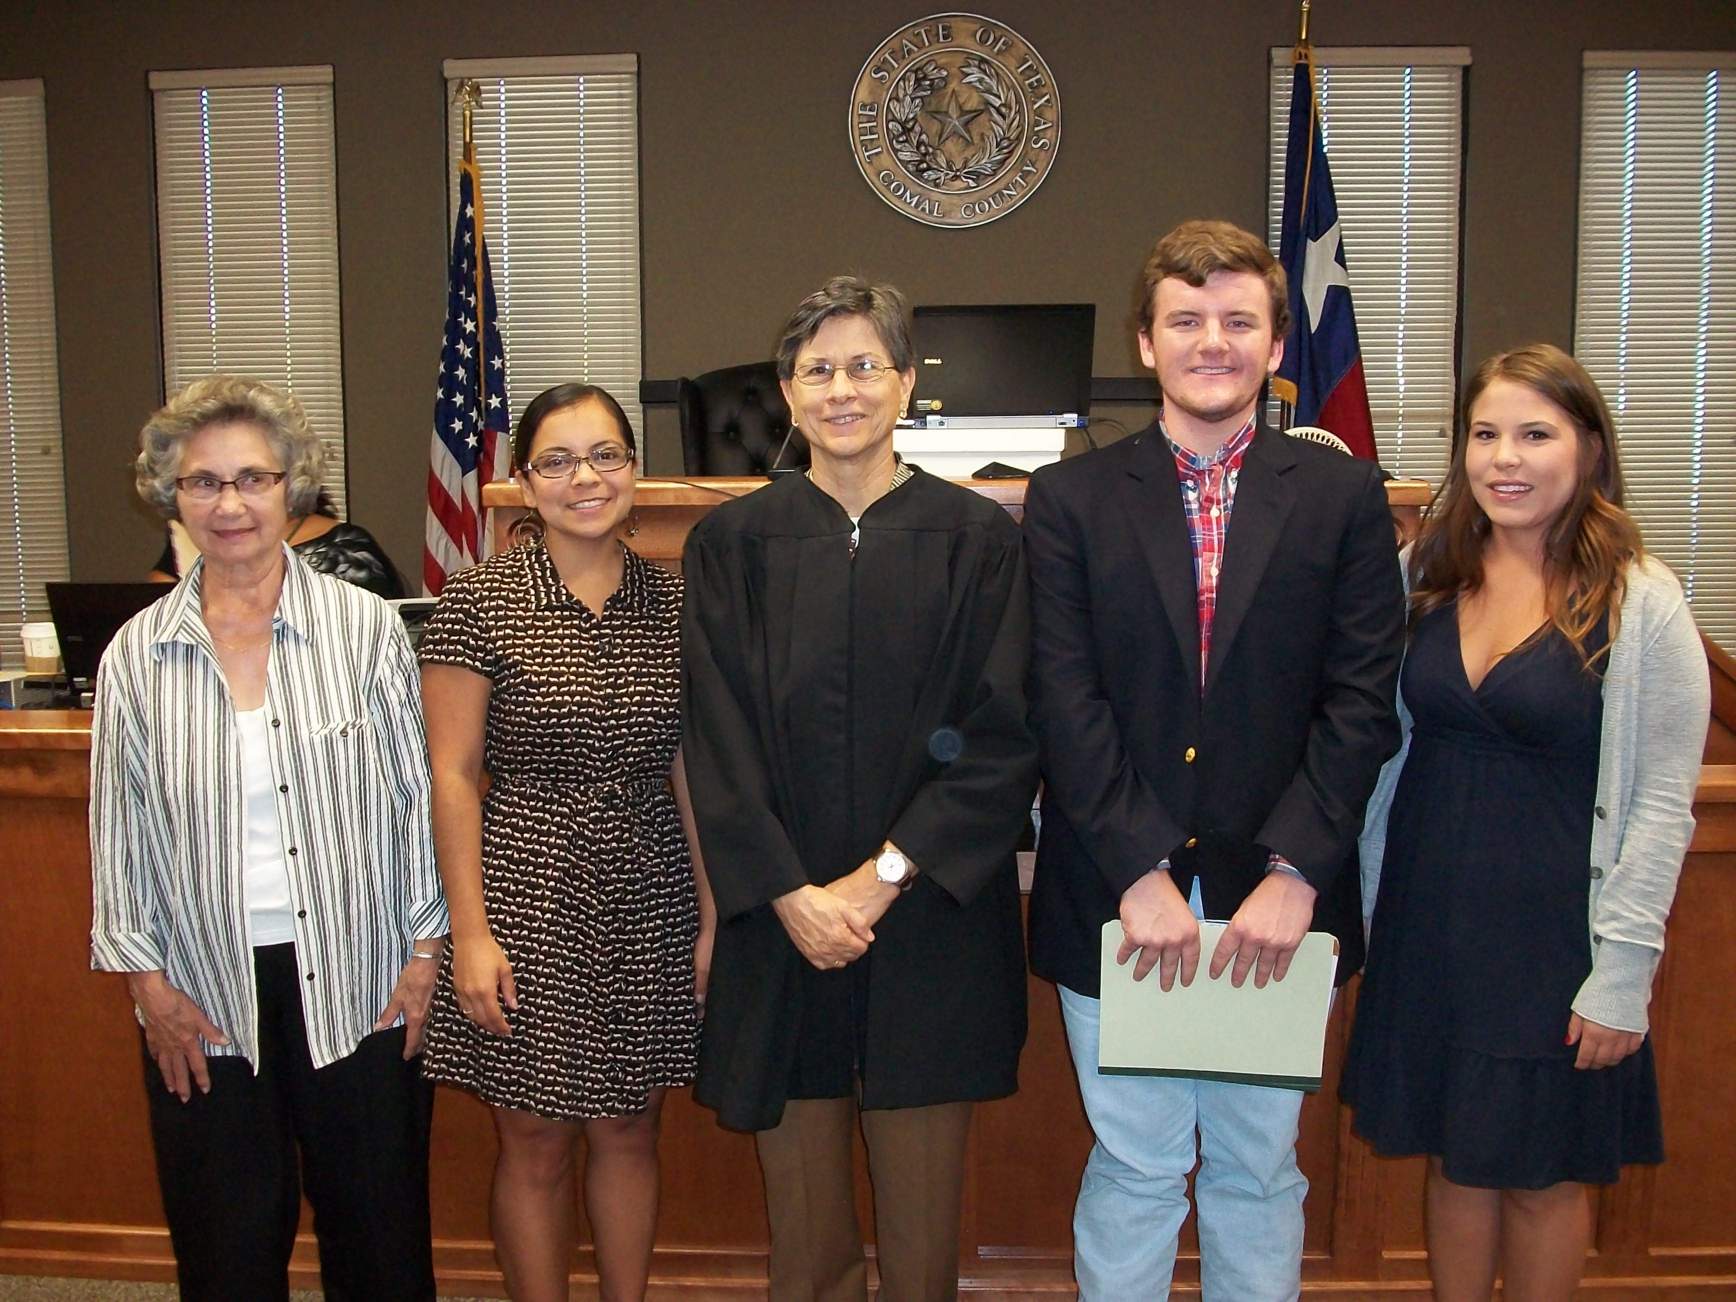 a judge and four CASA advocates pose in a courtroom after a swearing in ceremony